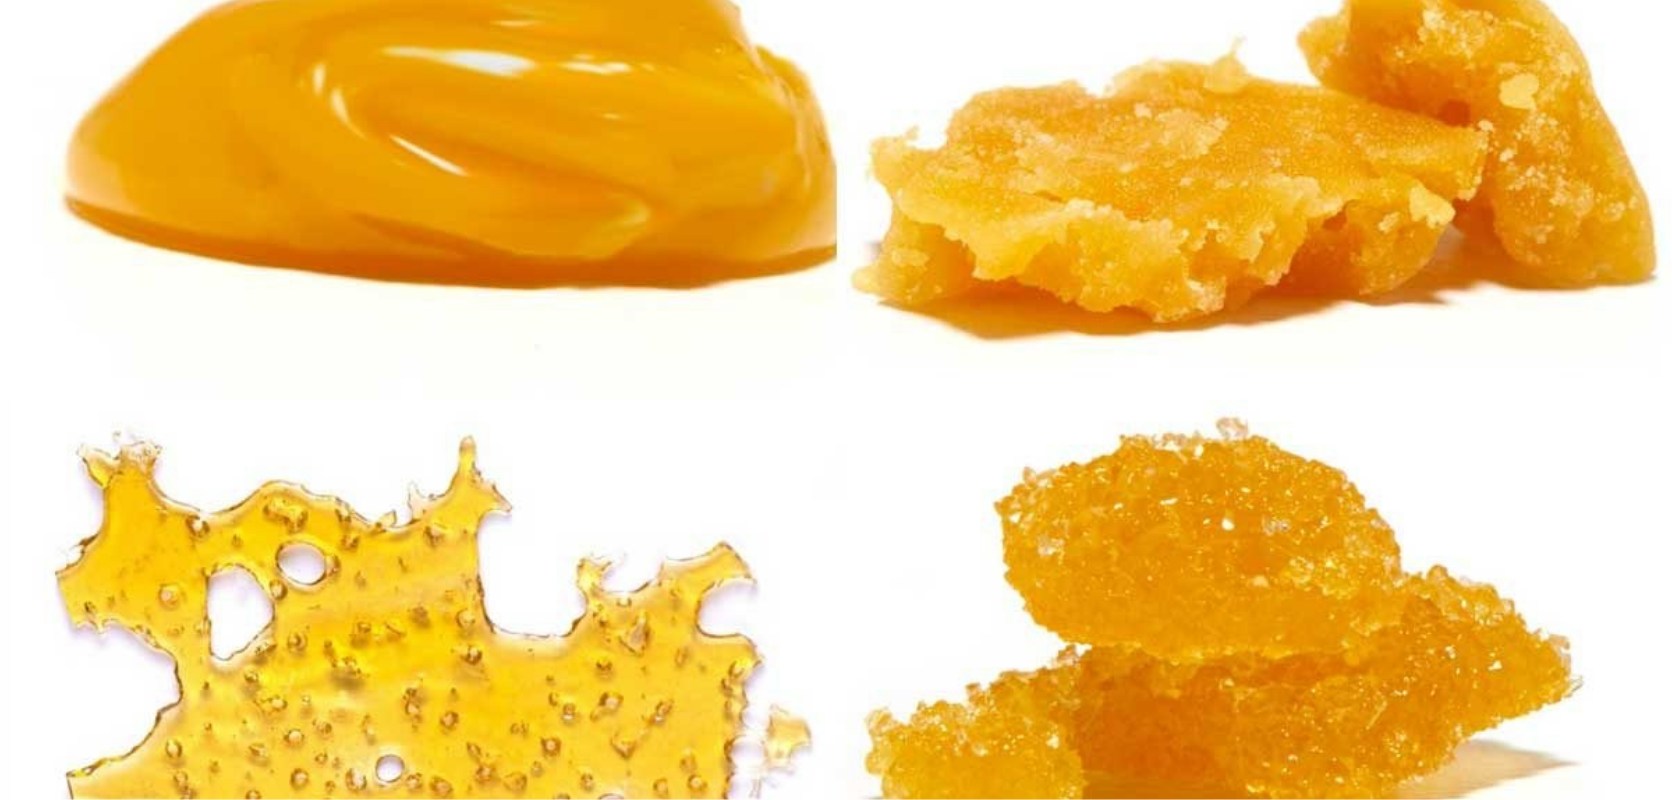 Shatter is all the cannabis rage these days. At Chronic Farms online dispensary we’ve got all your shatter weeds needs covered. 